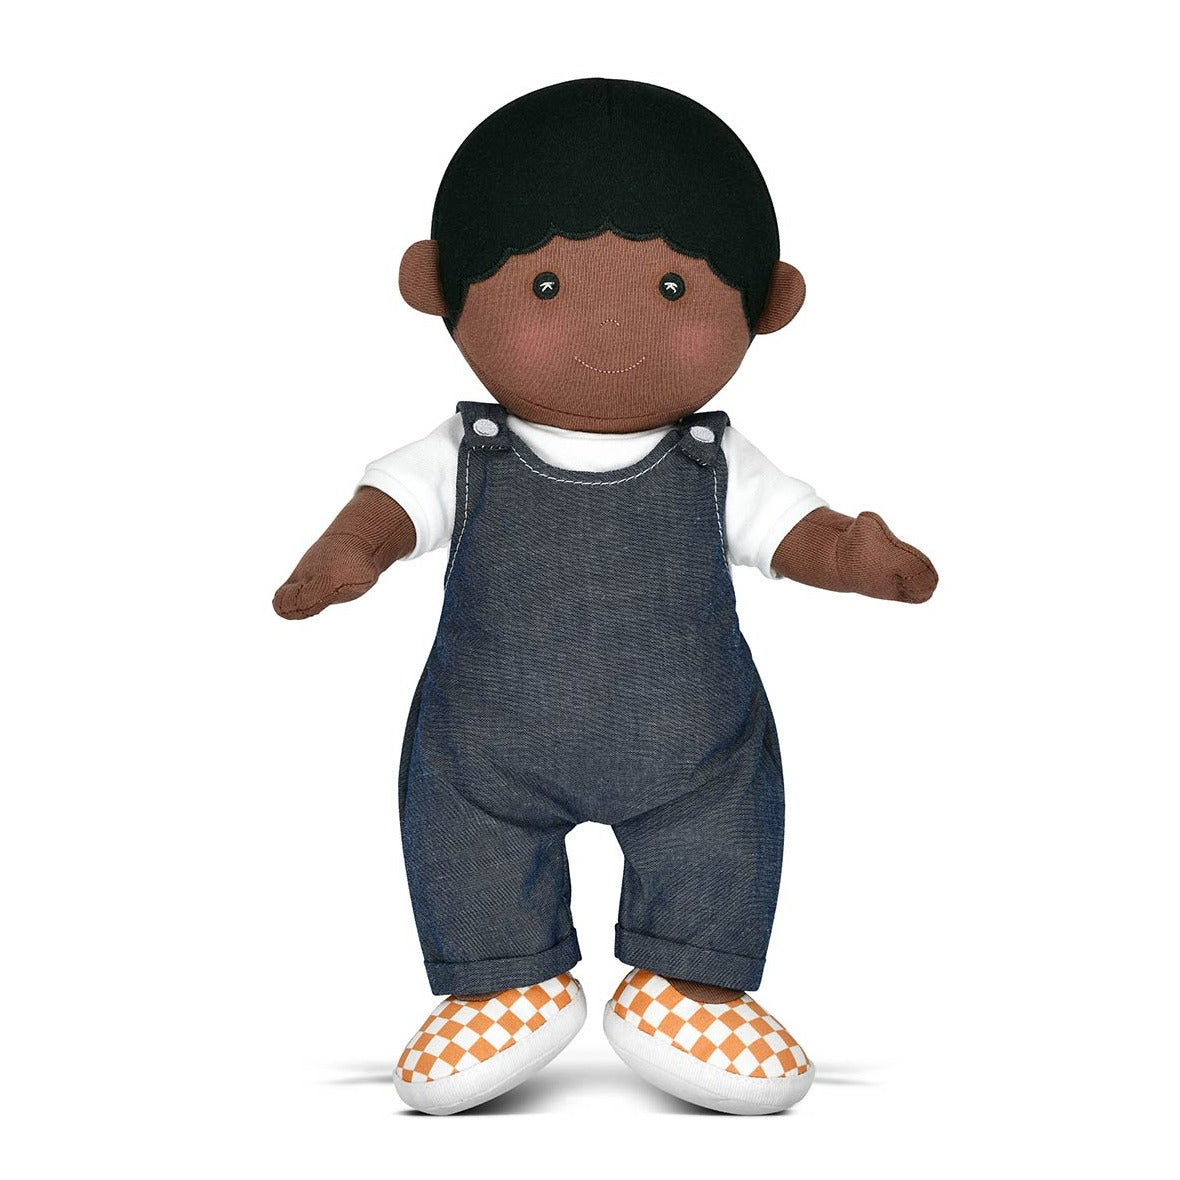 Organic cotton baby doll boy - angus and dudley